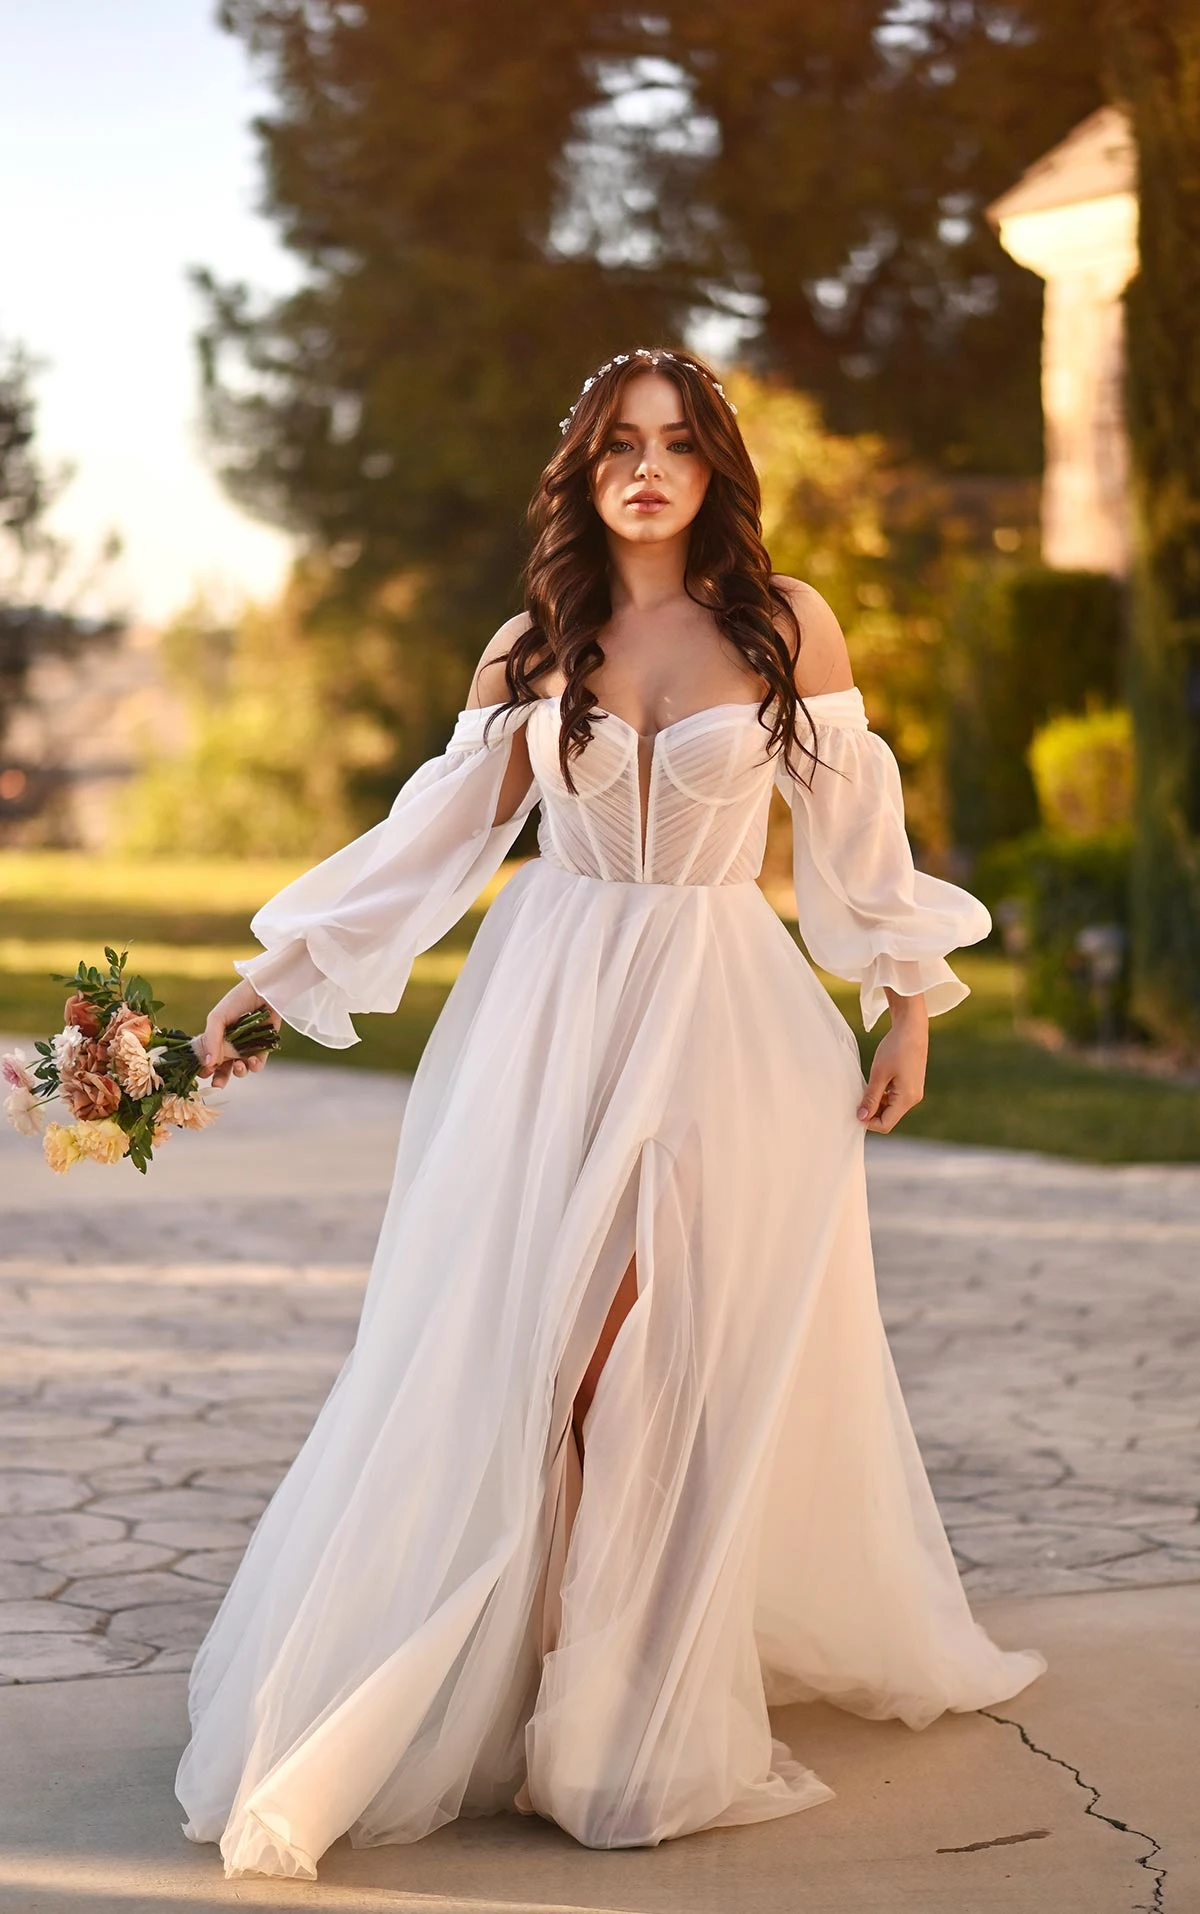 1497 Luxe Strapless A-Line Wedding Dress with Off-the-Shoulder Bell Sleeves  by Martina Liana